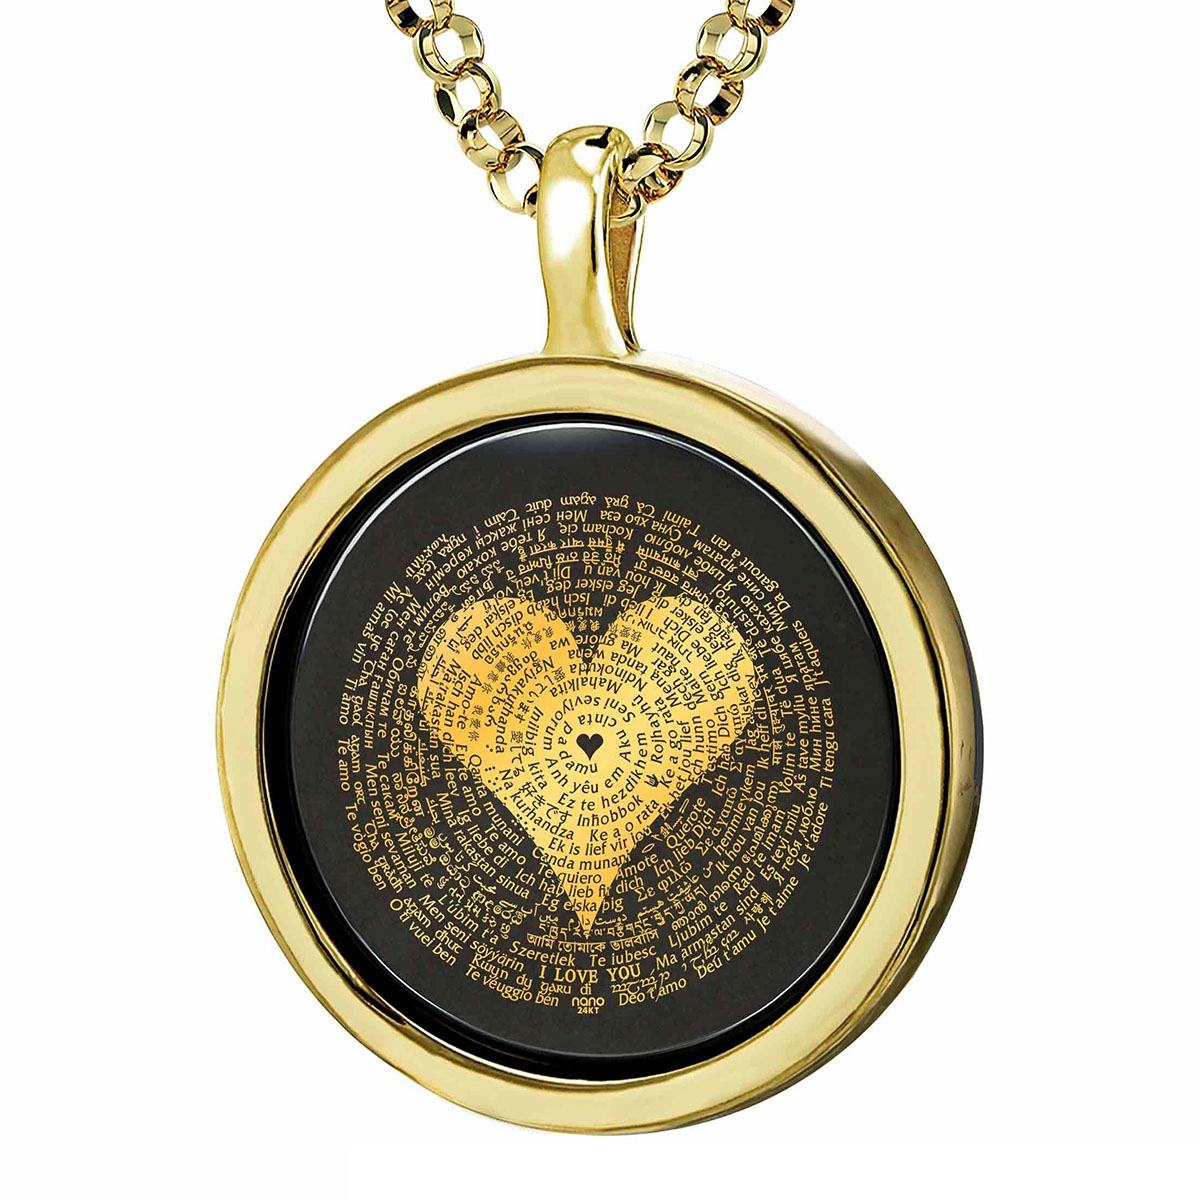 "I Love You" In 120 Languages With Heart Design: Onyx Stone Micro-Inscribed With 24K Gold - 1